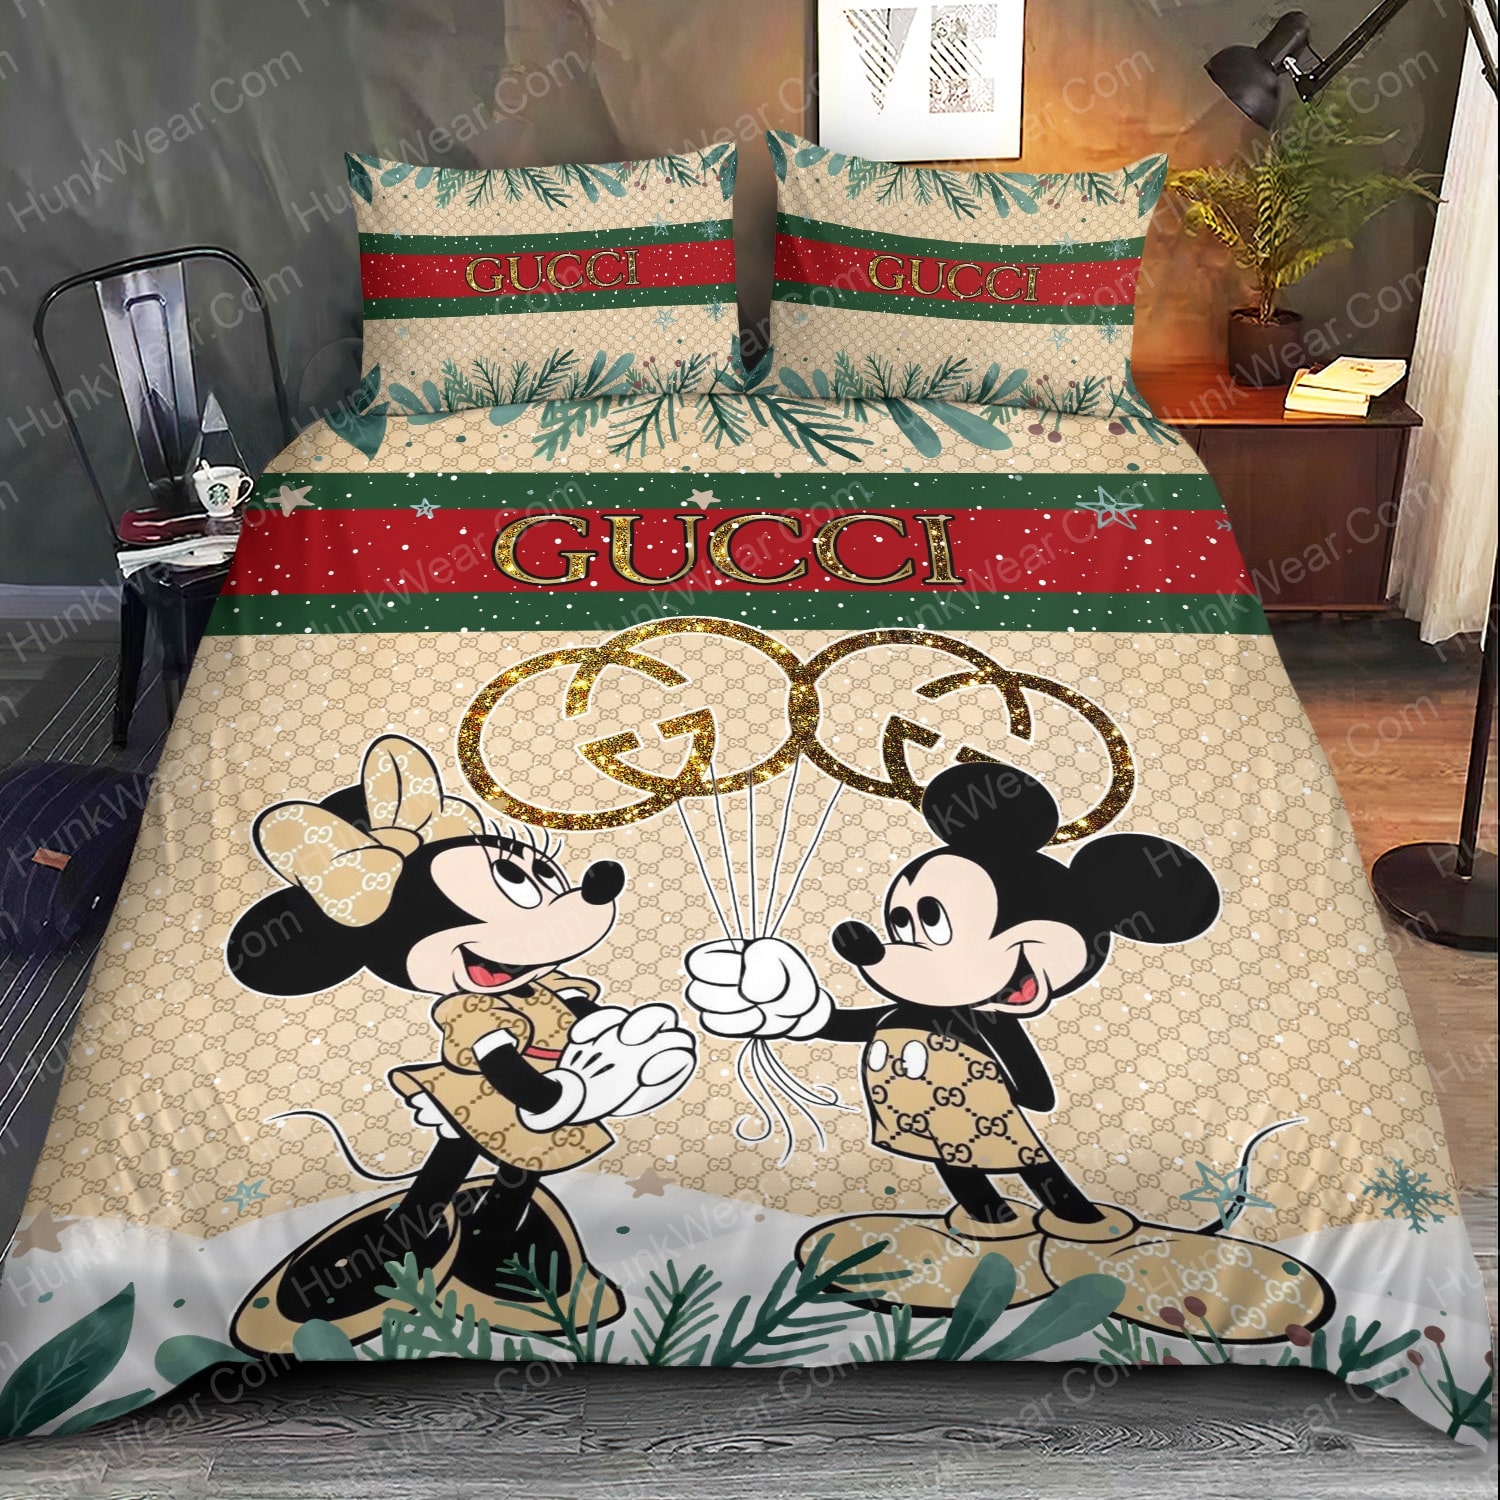 gucci mickey mouse bed set bedding set